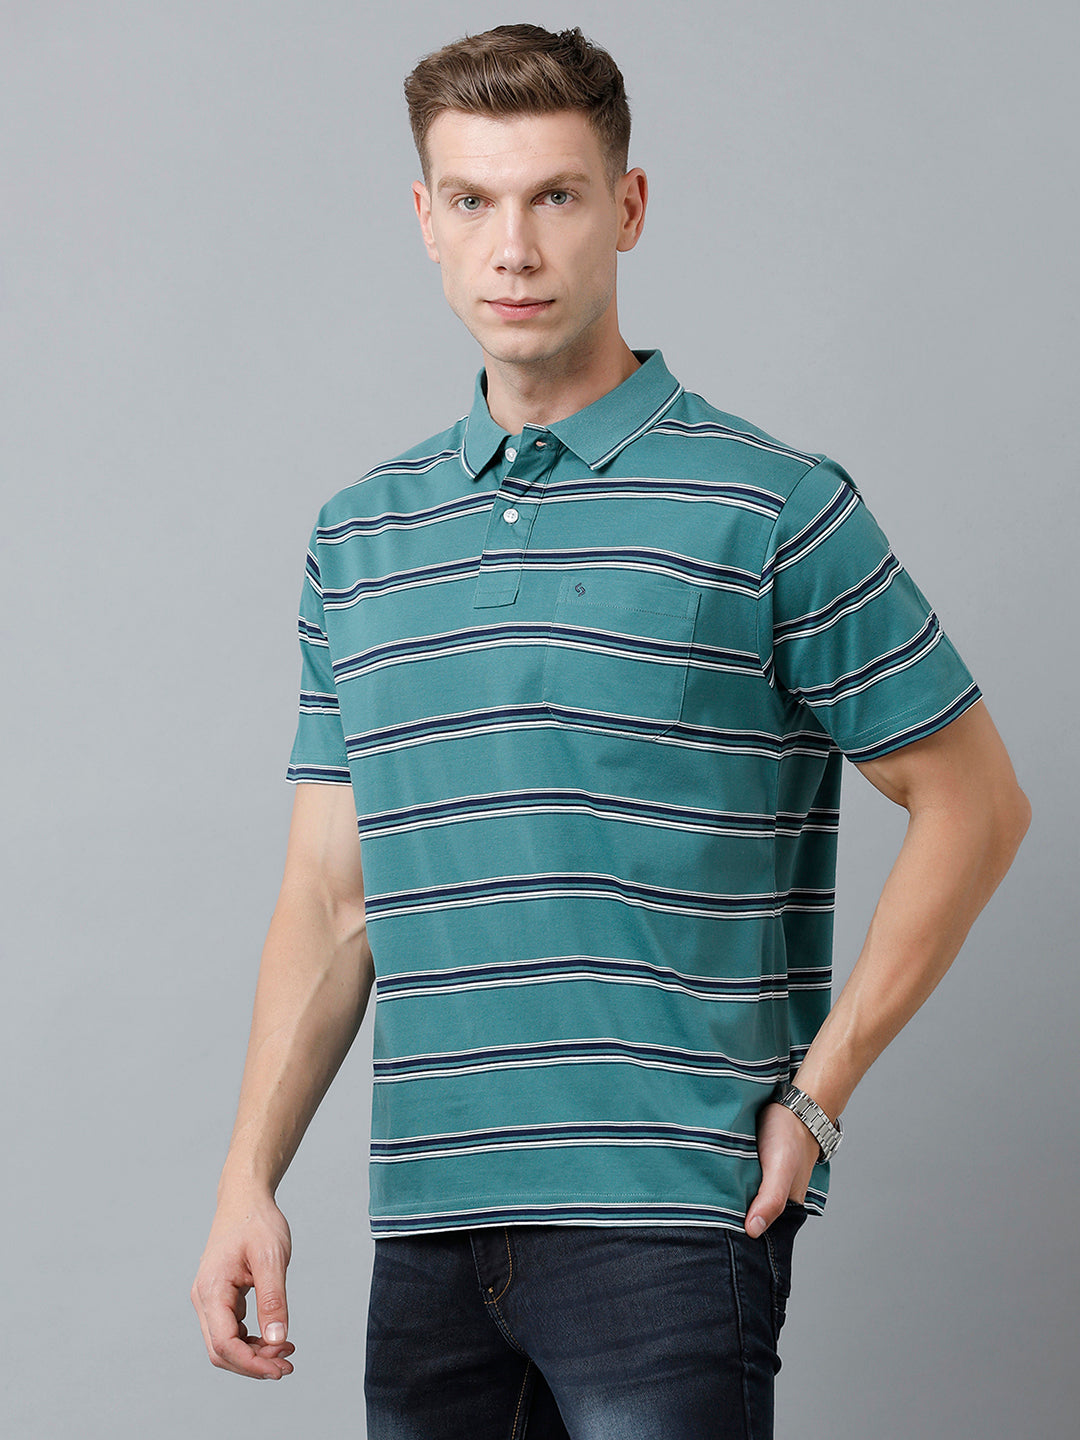 Classic Polo Men's Cotton Half Sleeve Striped Authentic Fit Polo Neck Green Color T-Shirt | Ap - 82 B